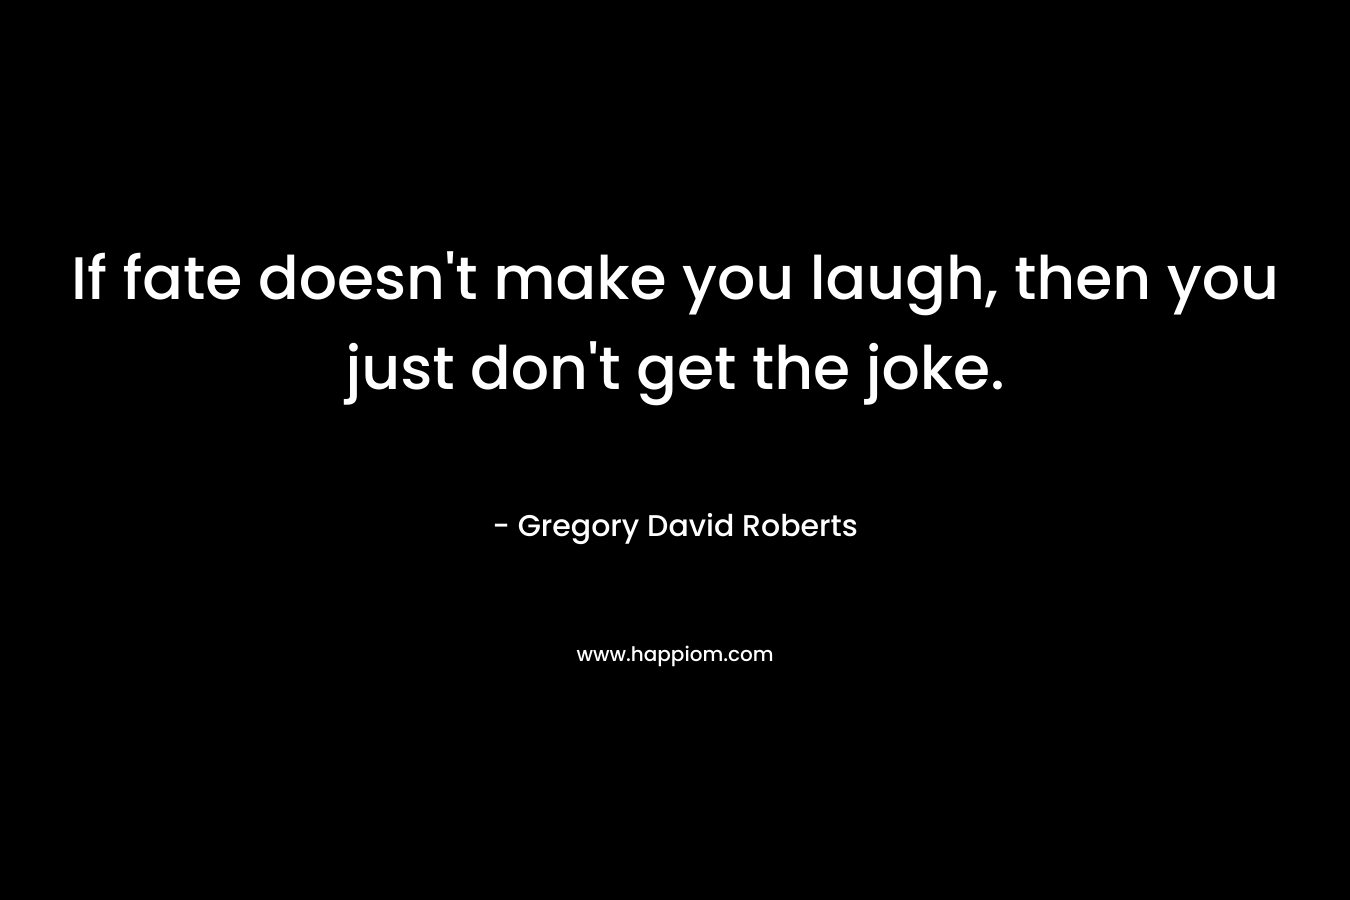 If fate doesn’t make you laugh, then you just don’t get the joke. – Gregory David Roberts